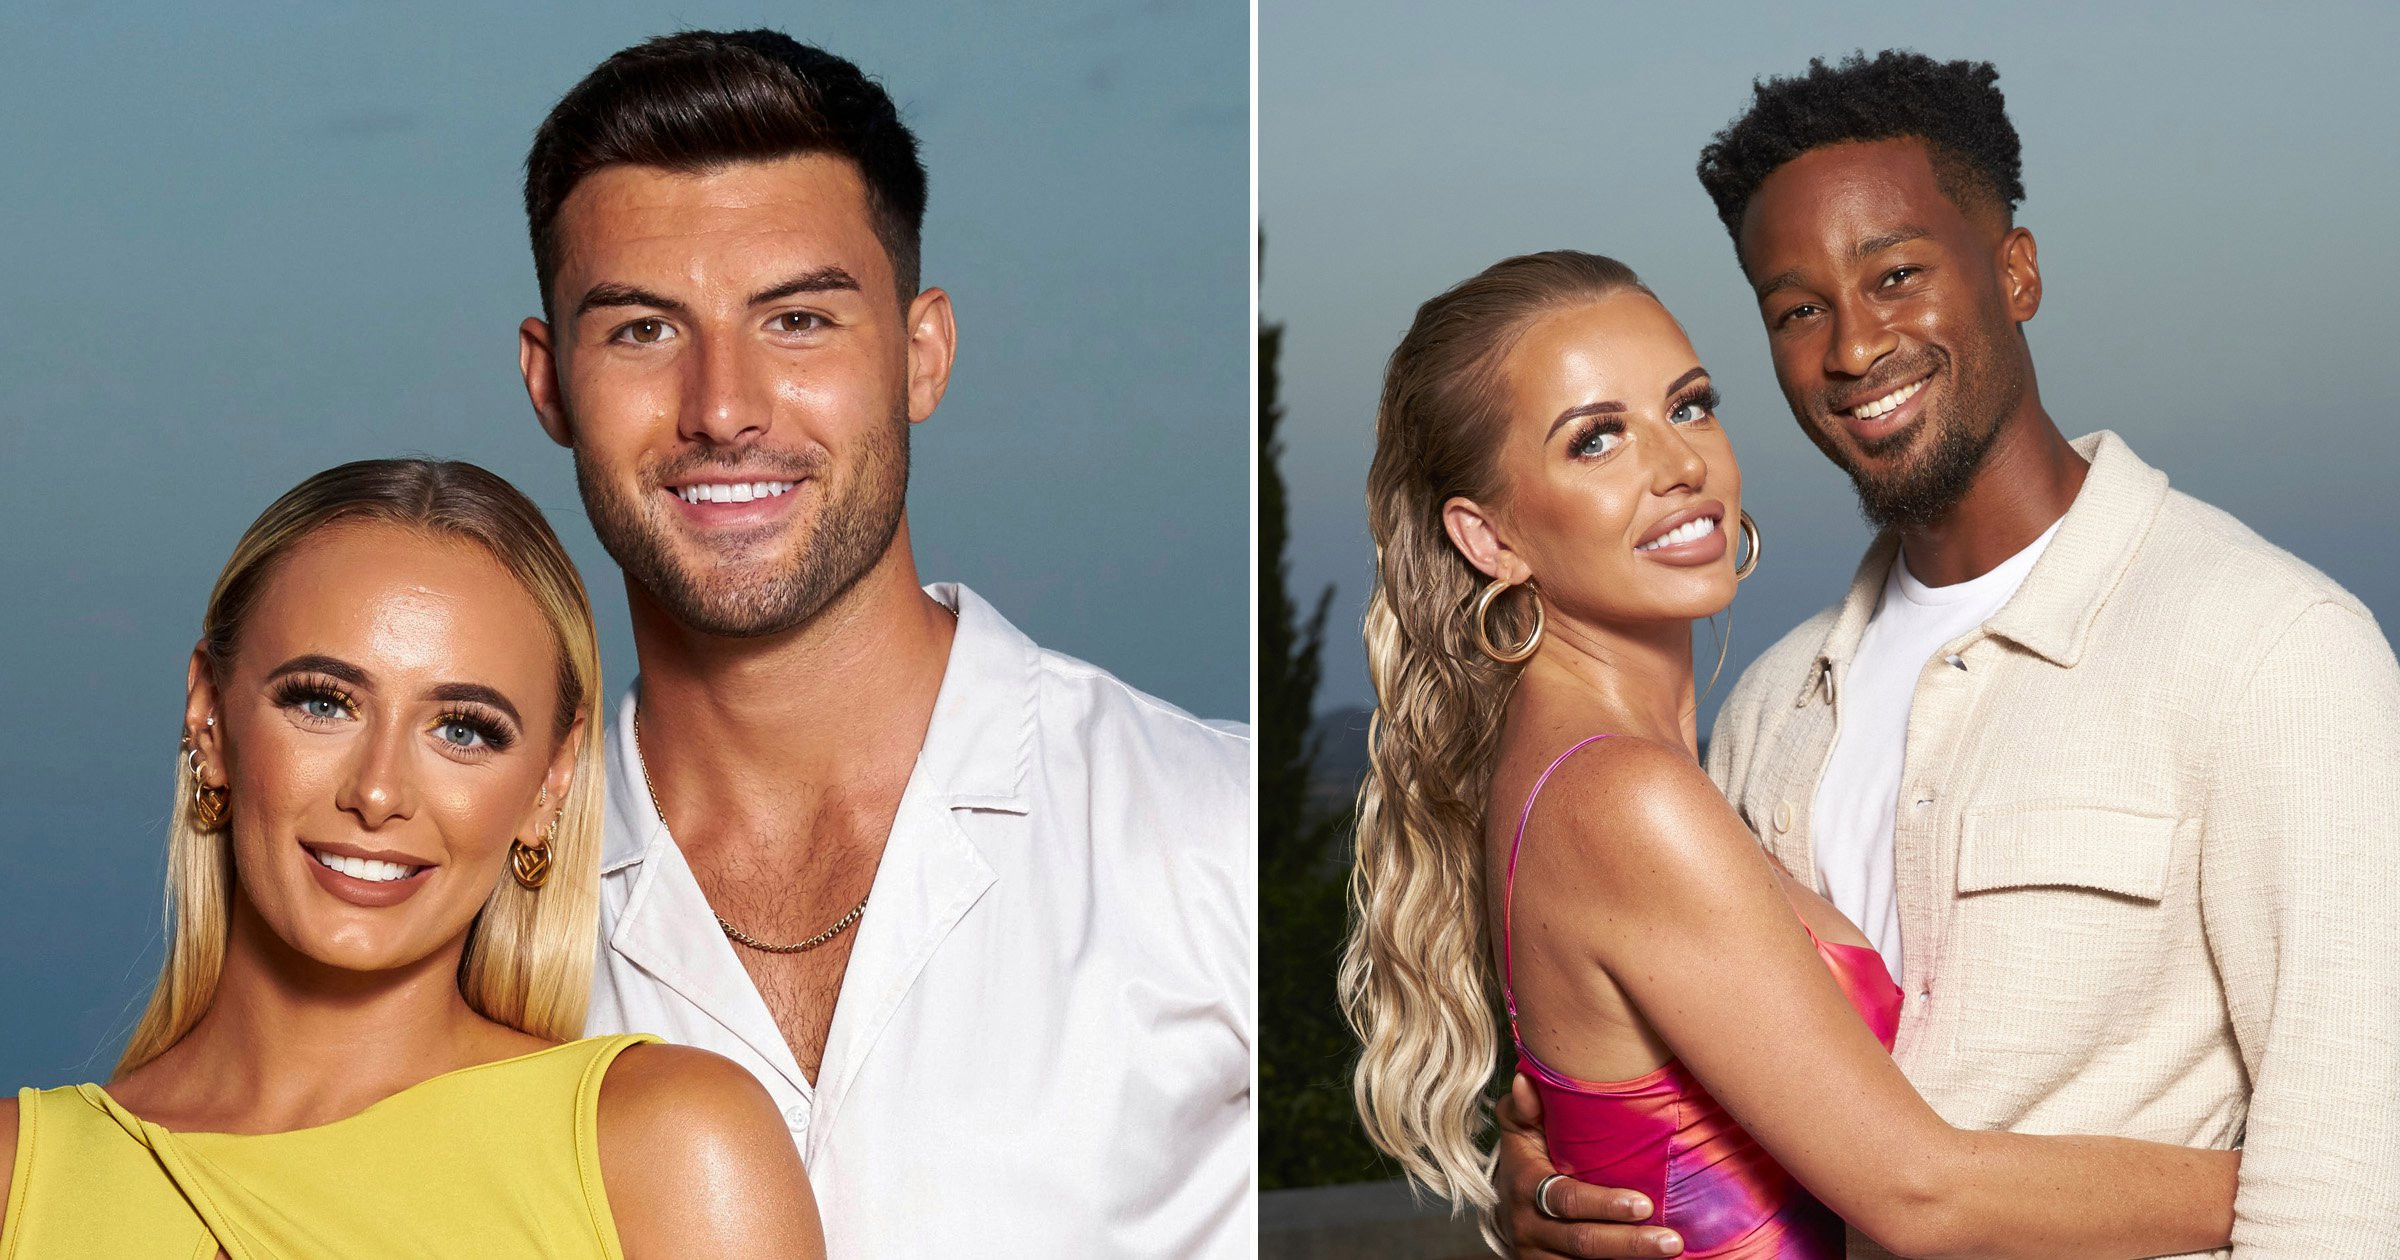 Love Island 2021 winners: Which couples will go the distance? Relationship expert weighs in on finalists from Millie and Liam to Faye and Teddy